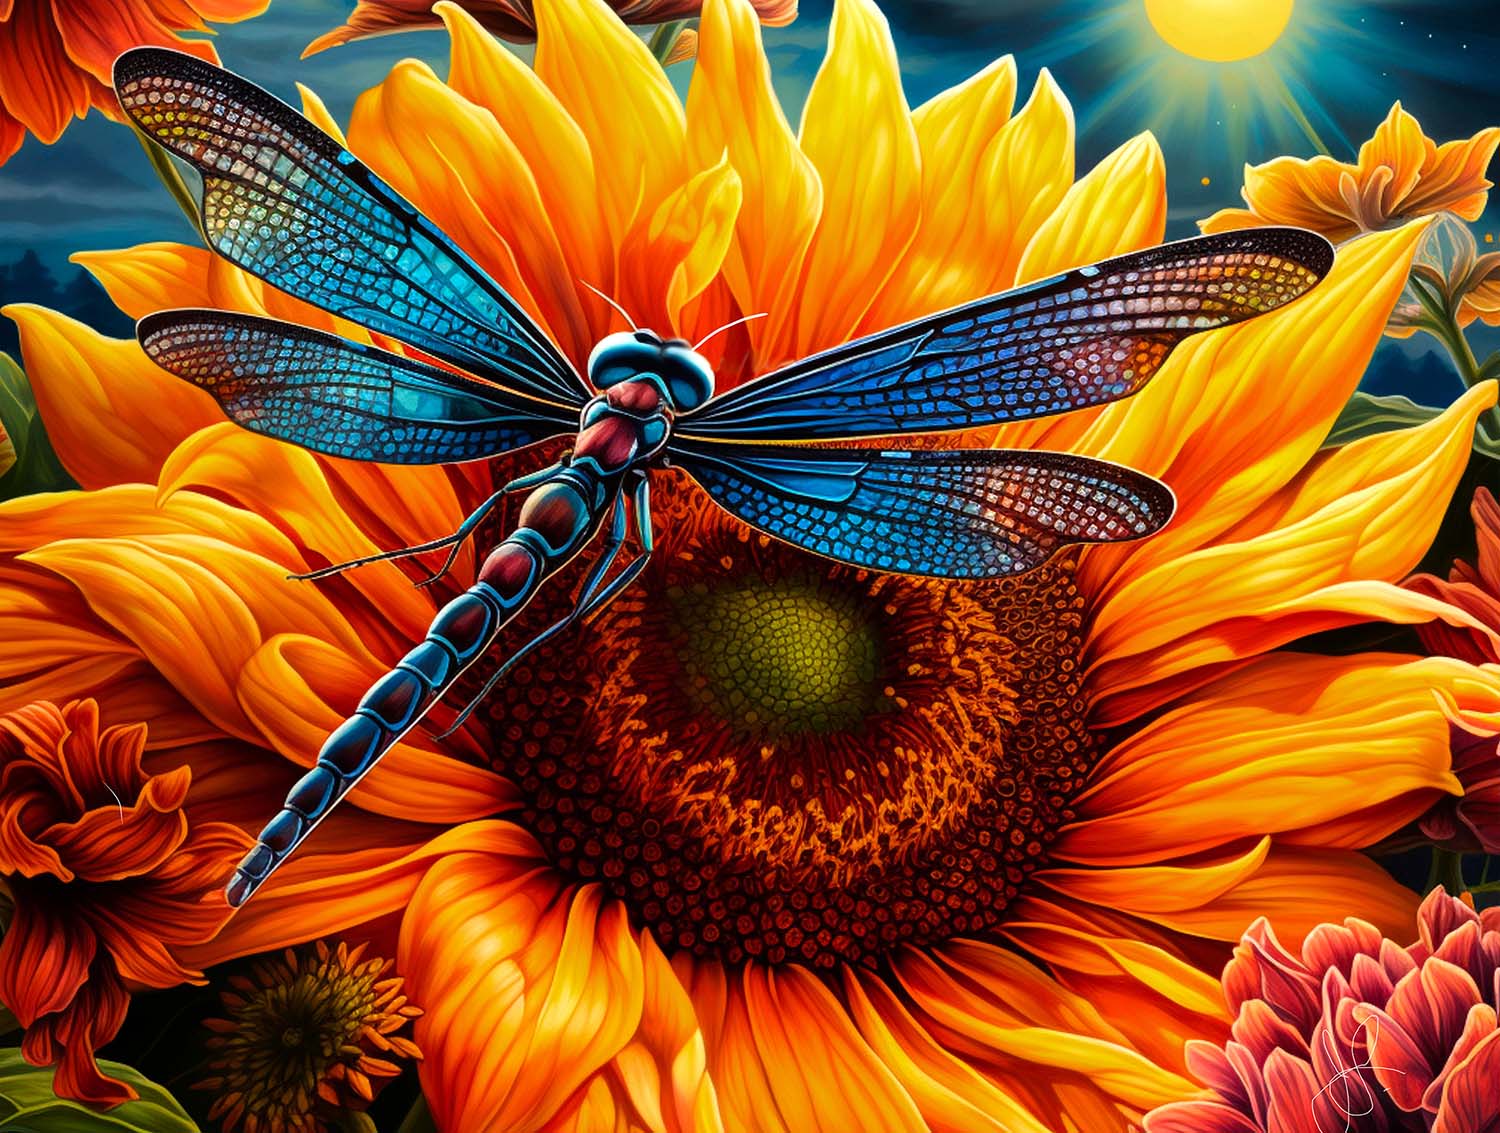 Sunny Day Visit Butterflies and Insects Jigsaw Puzzle